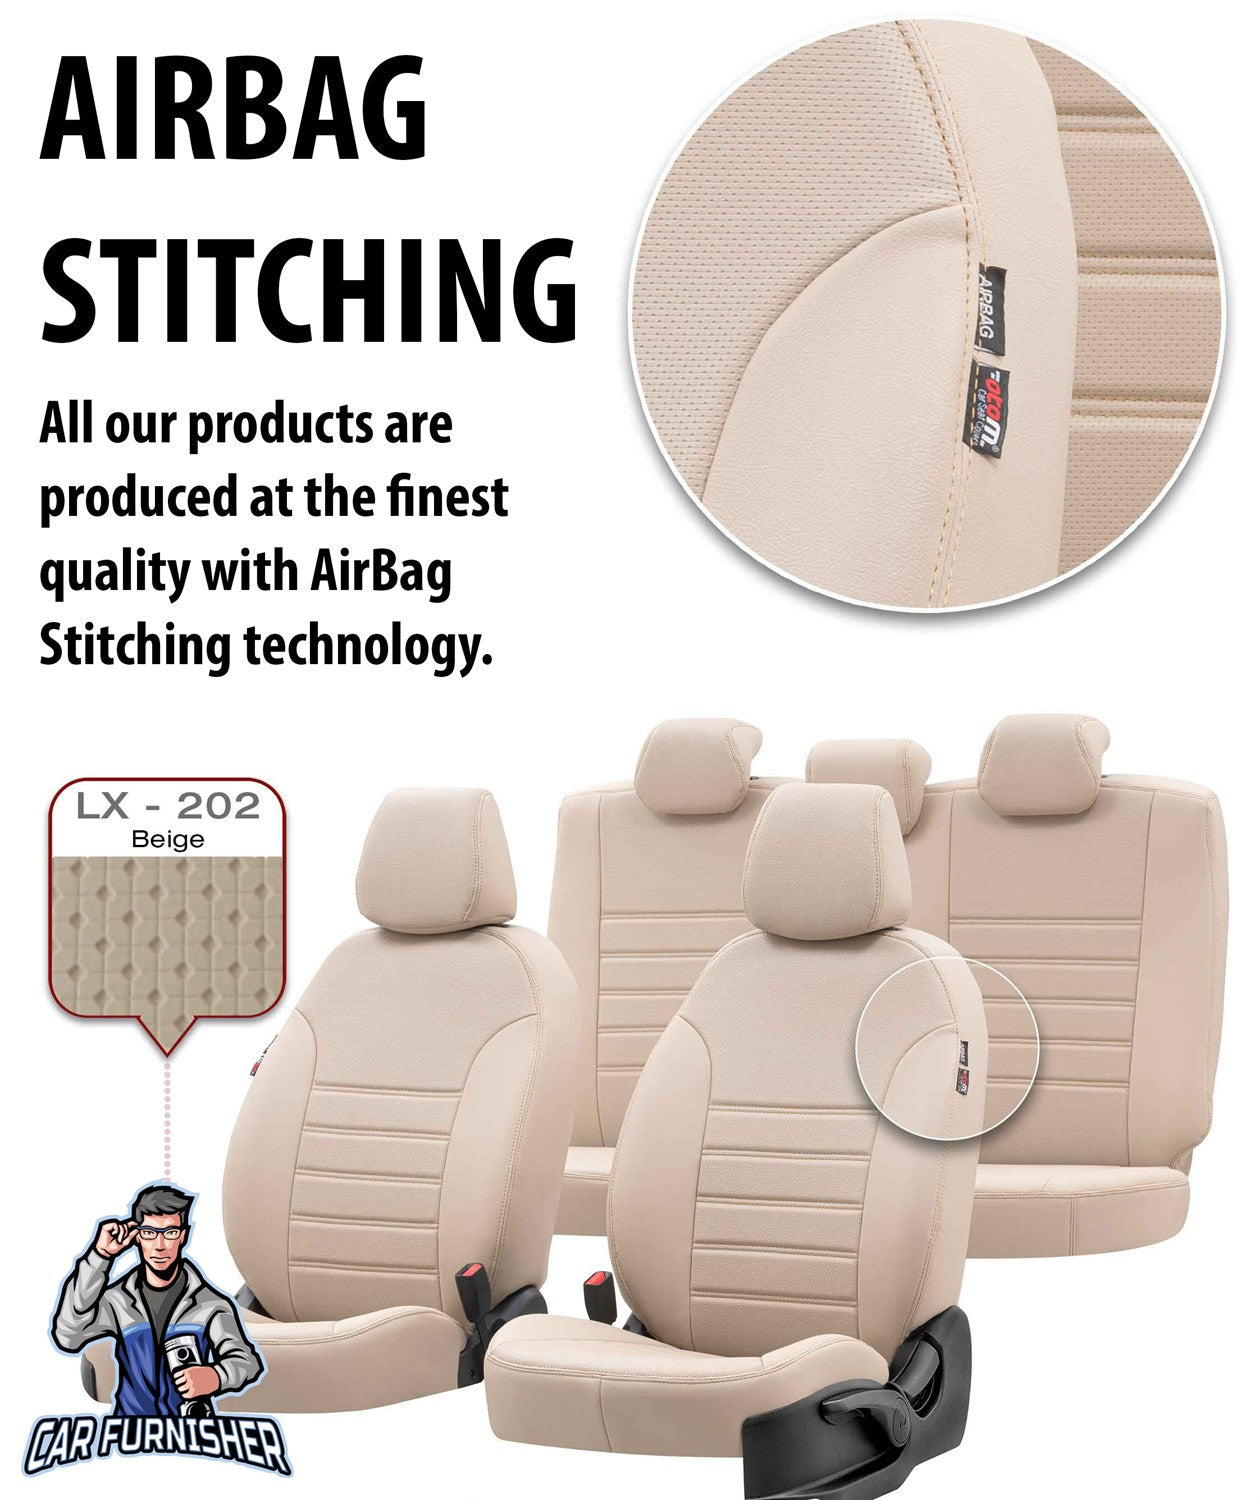 Renault Scenic Seat Covers New York Leather Design Ivory Leather